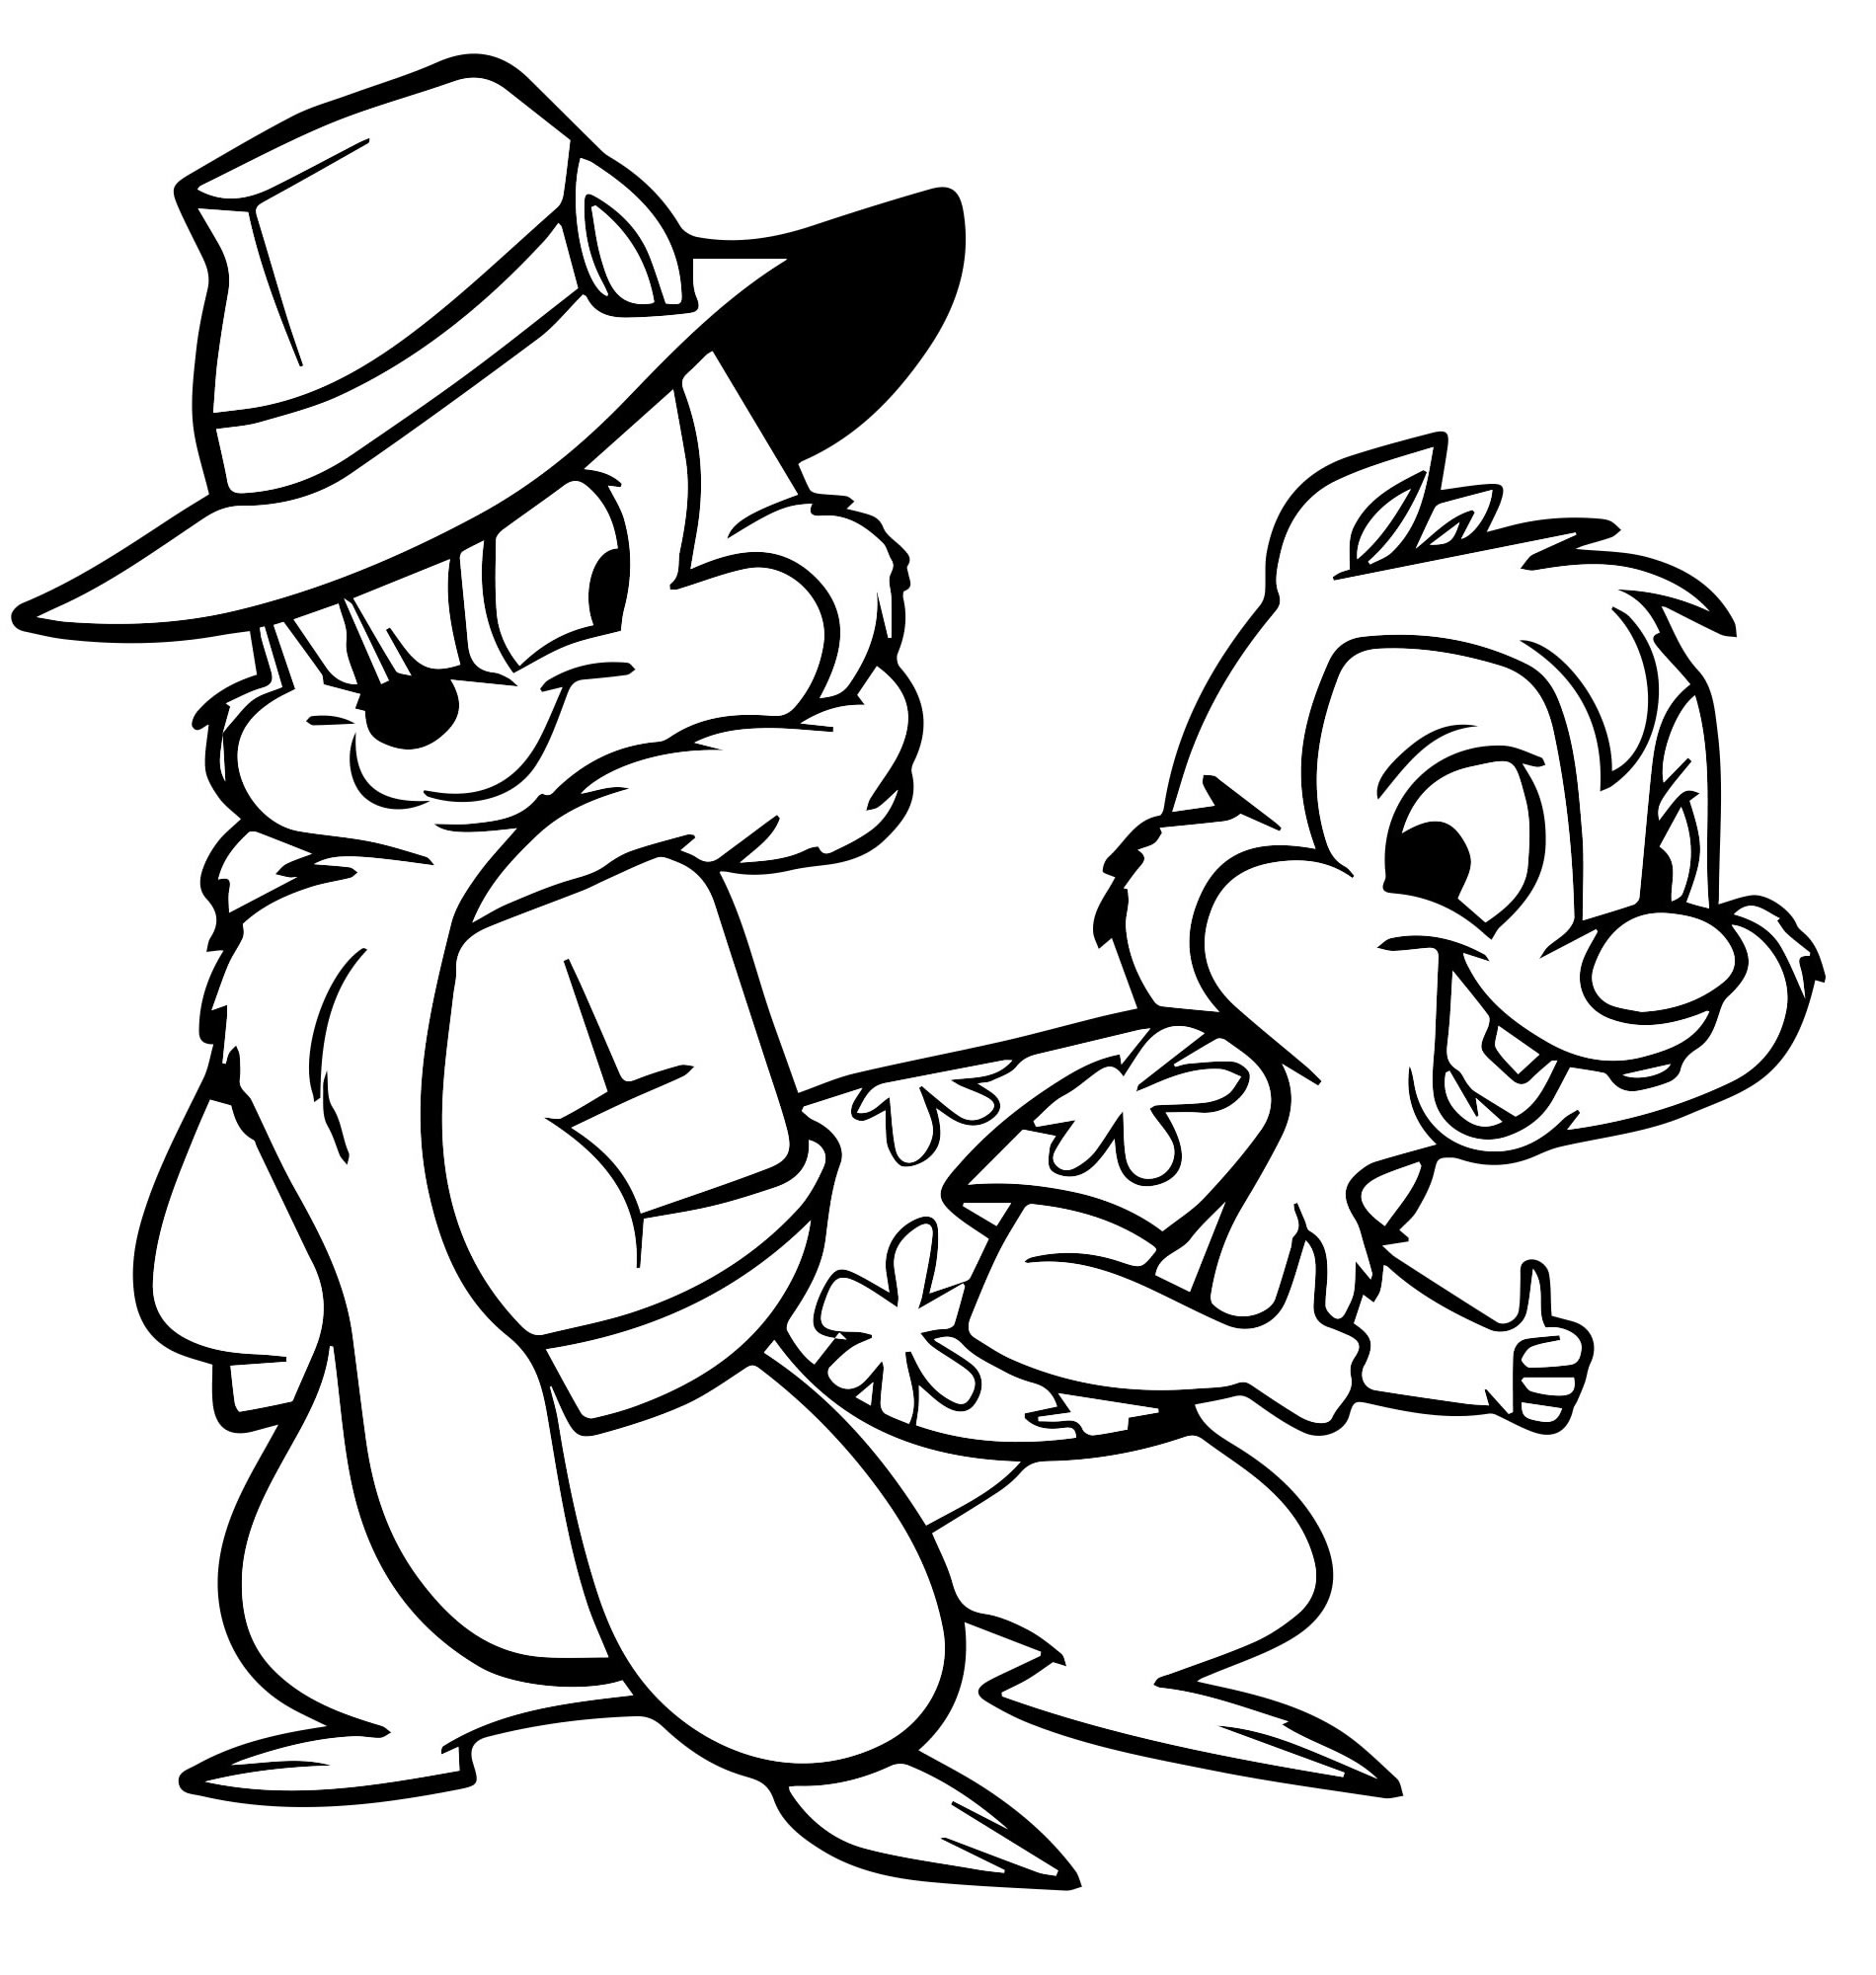 Chip and dale live coloring for kids